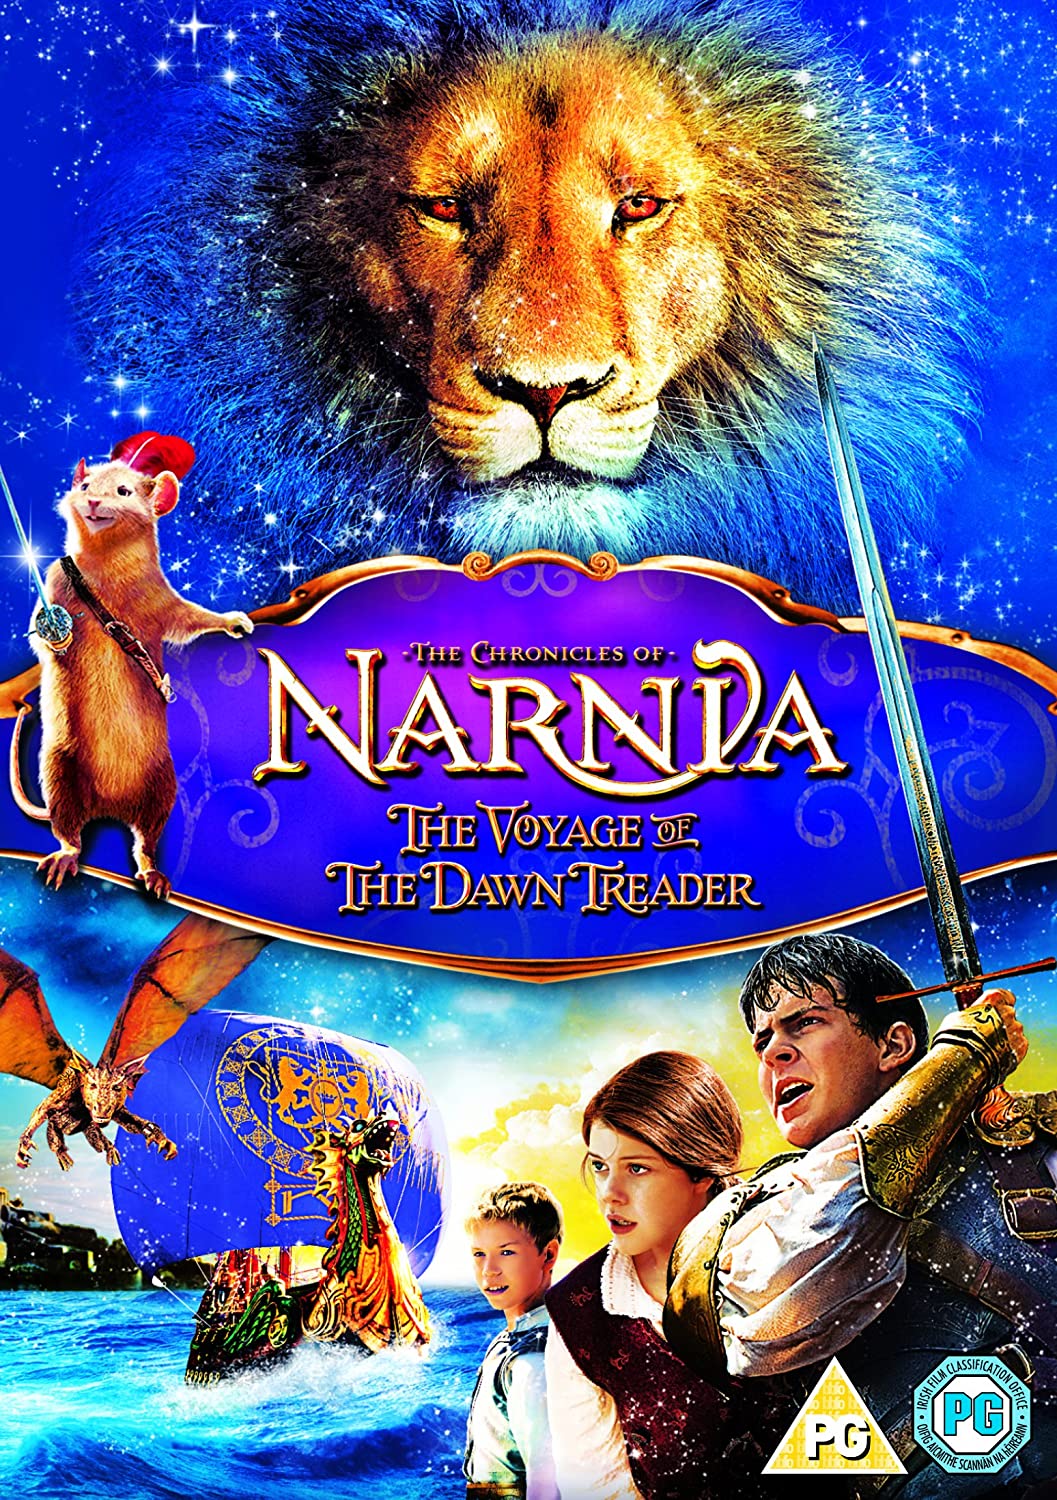 The Chronicles of Narnia: The Voyage of the Dawn Treader - Fantasy [DVD]